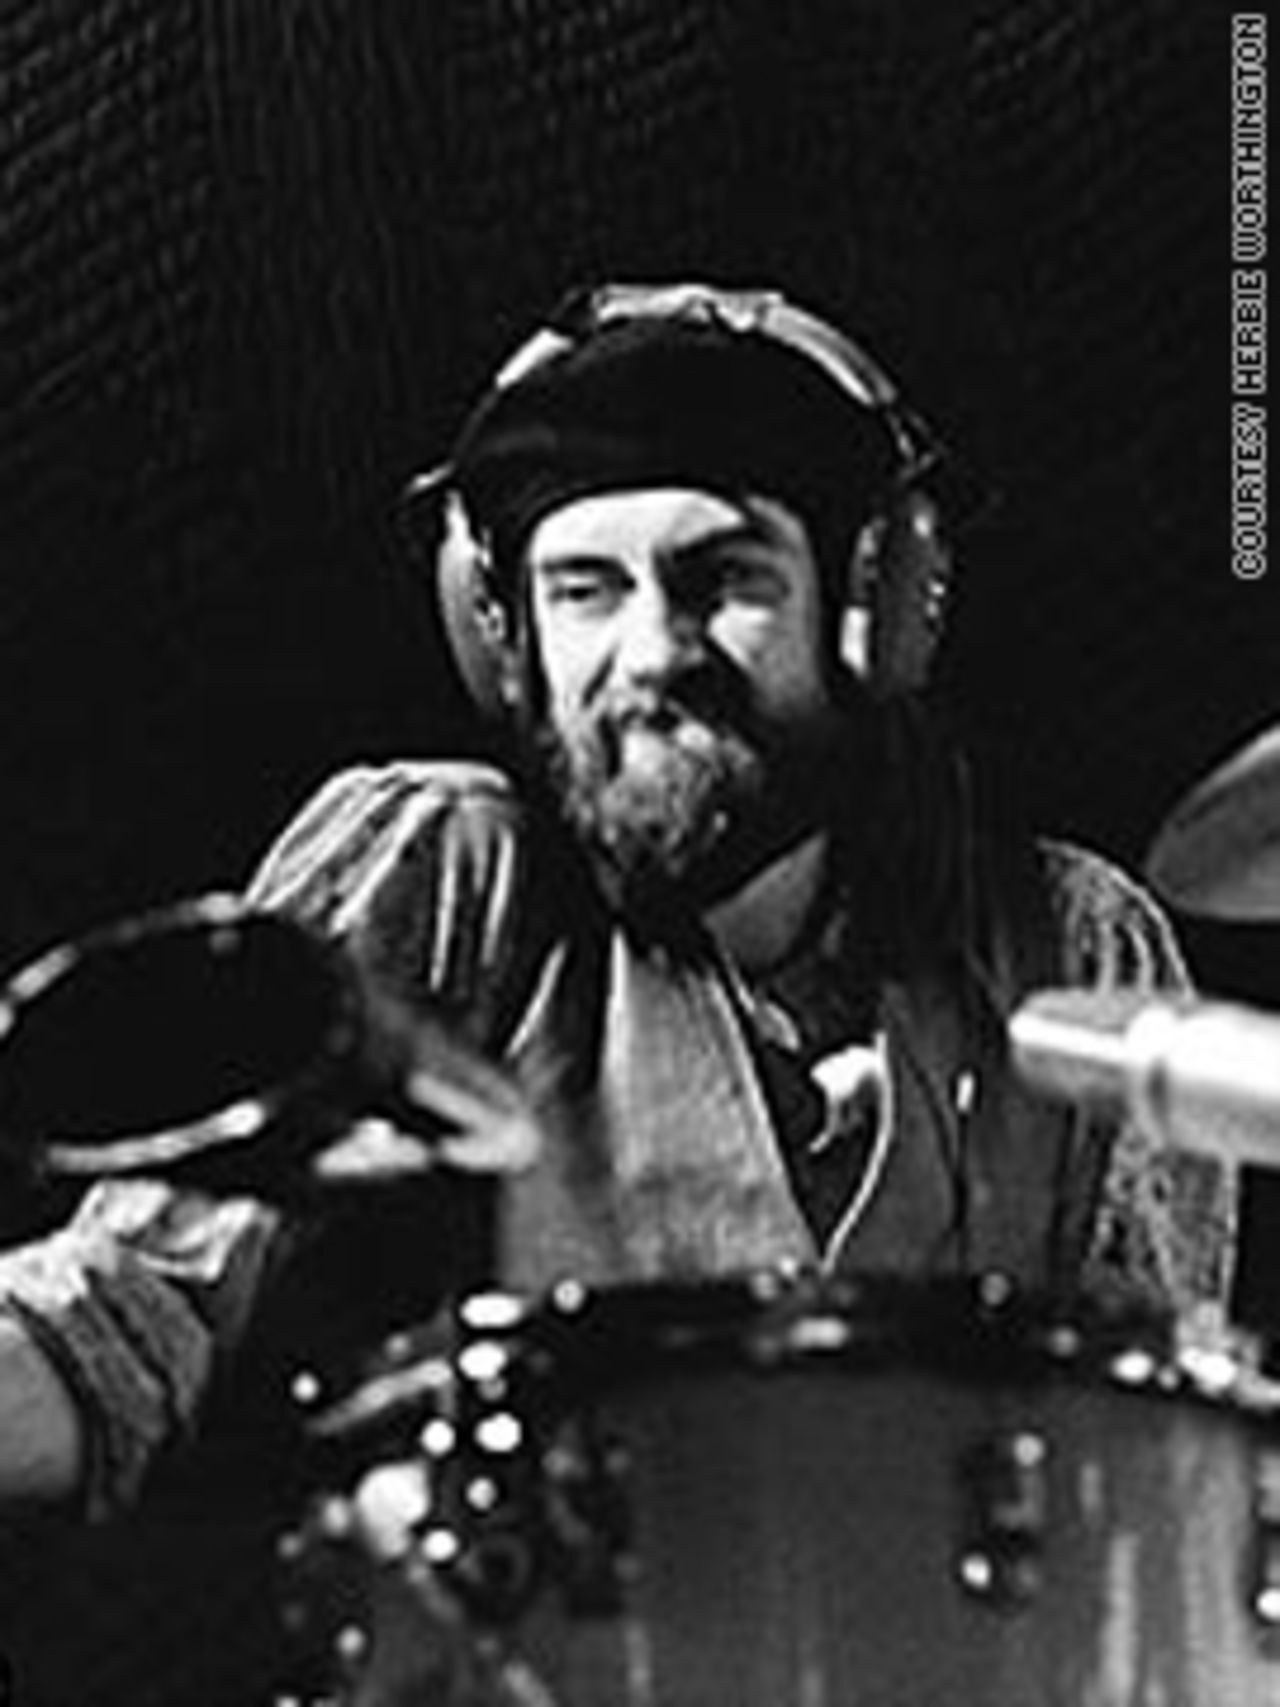 Mick Fleetwood on drums. 